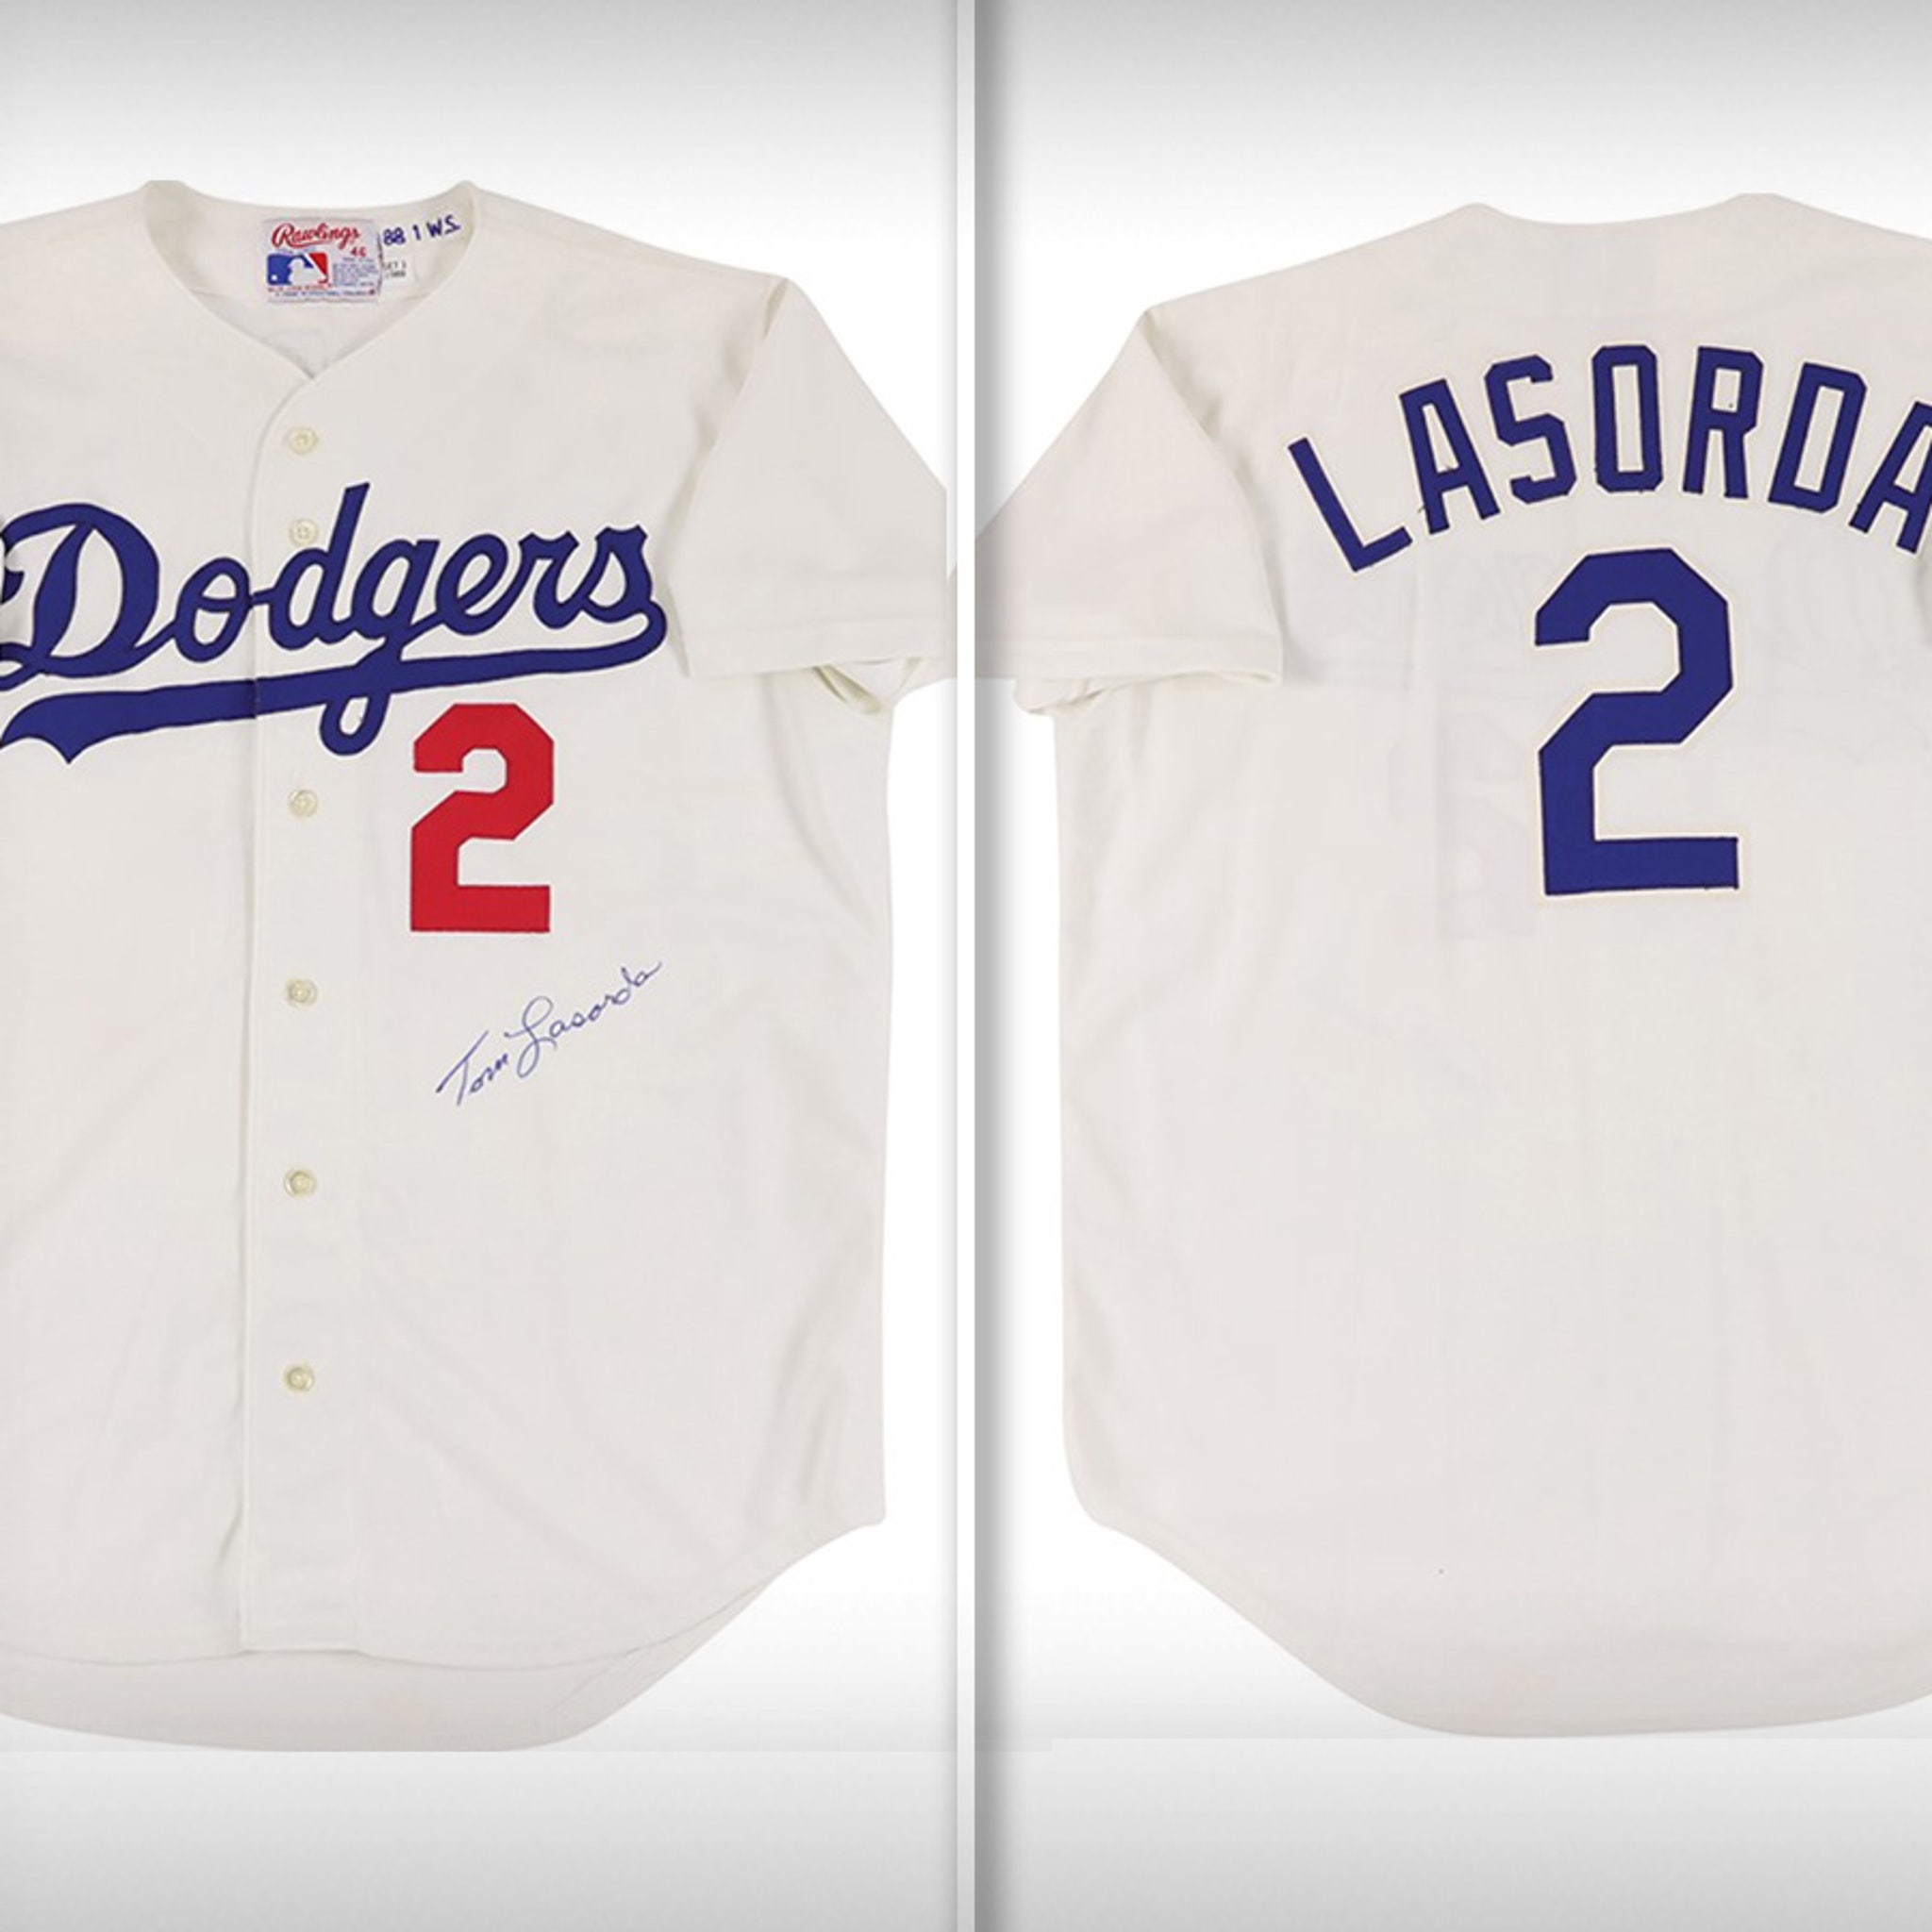 Lot Detail - KIRK GIBSON'S 1988 WORLD SERIES LOS ANGELES DODGERS JERSEY  WORN TO HIT HISTORIC GAME WINNING HOME RUN IN GAME ONE